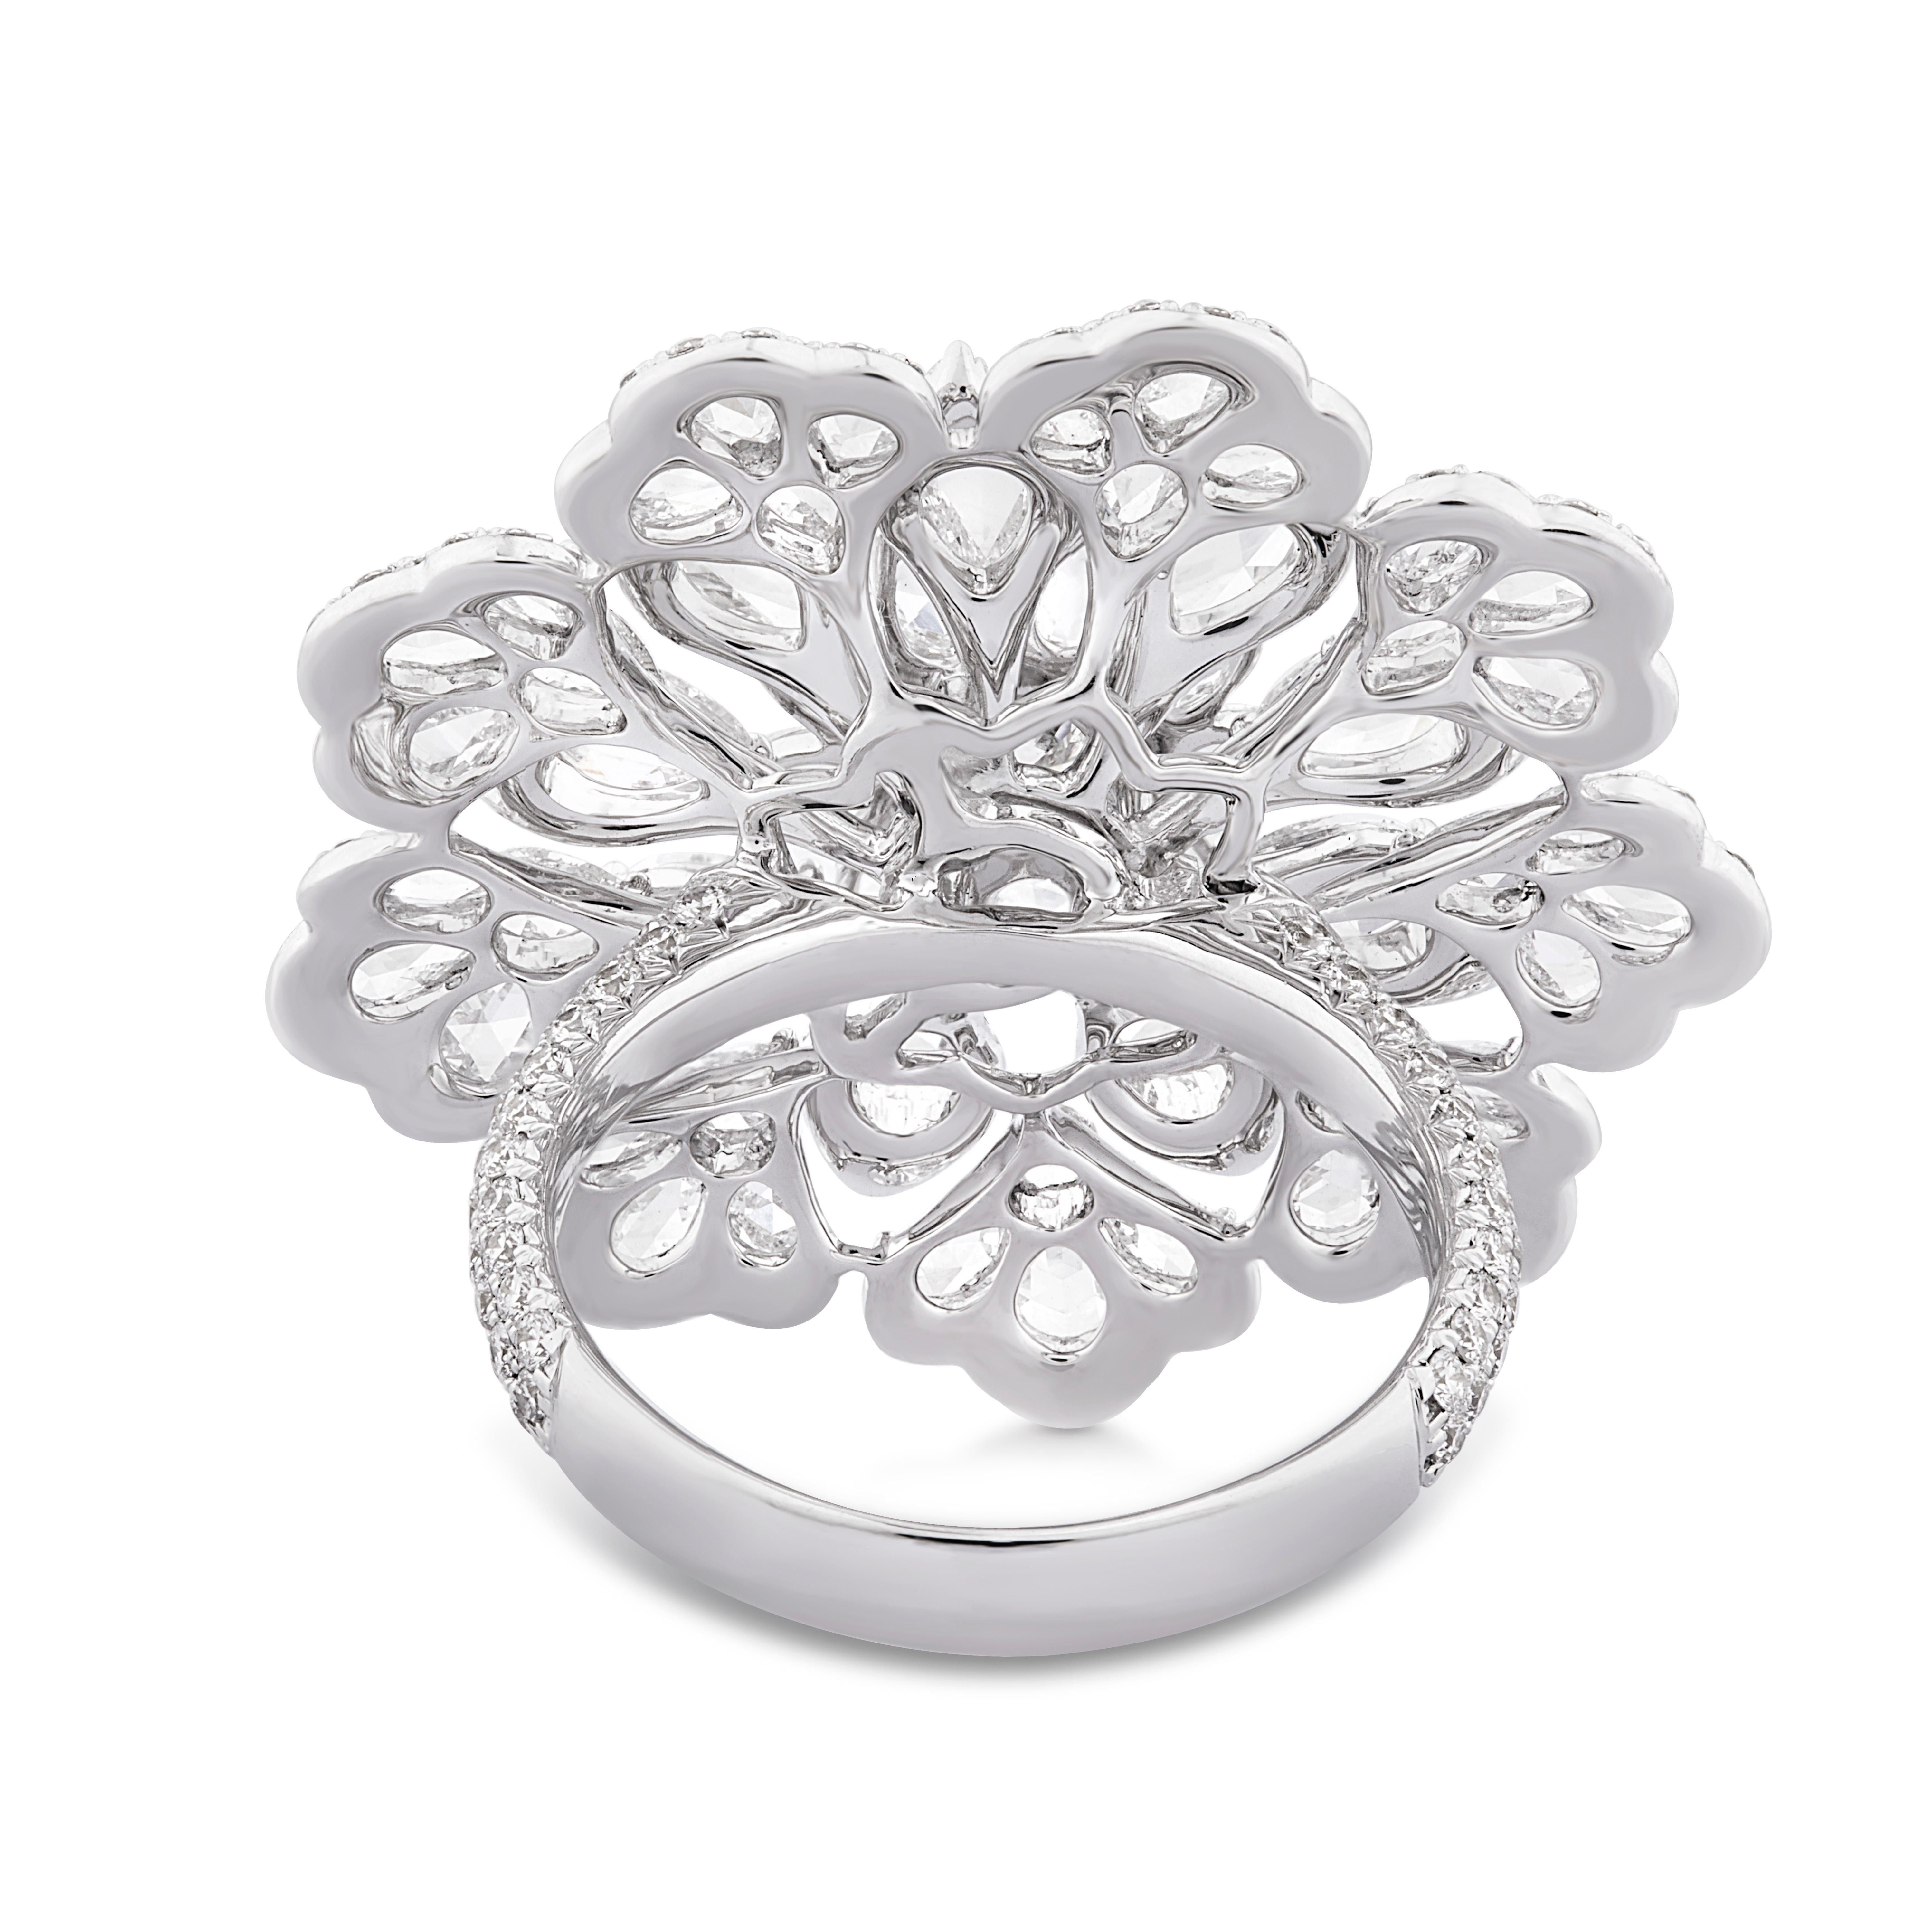 Rarever brings the floral collection taking the inspiration from the beauty and uniqueness of the flower. The Cocktail Ring is crafted with 54 pear shaped Rose Cut Diamonds set in step setting to attain the floral form of the earring, surrounding